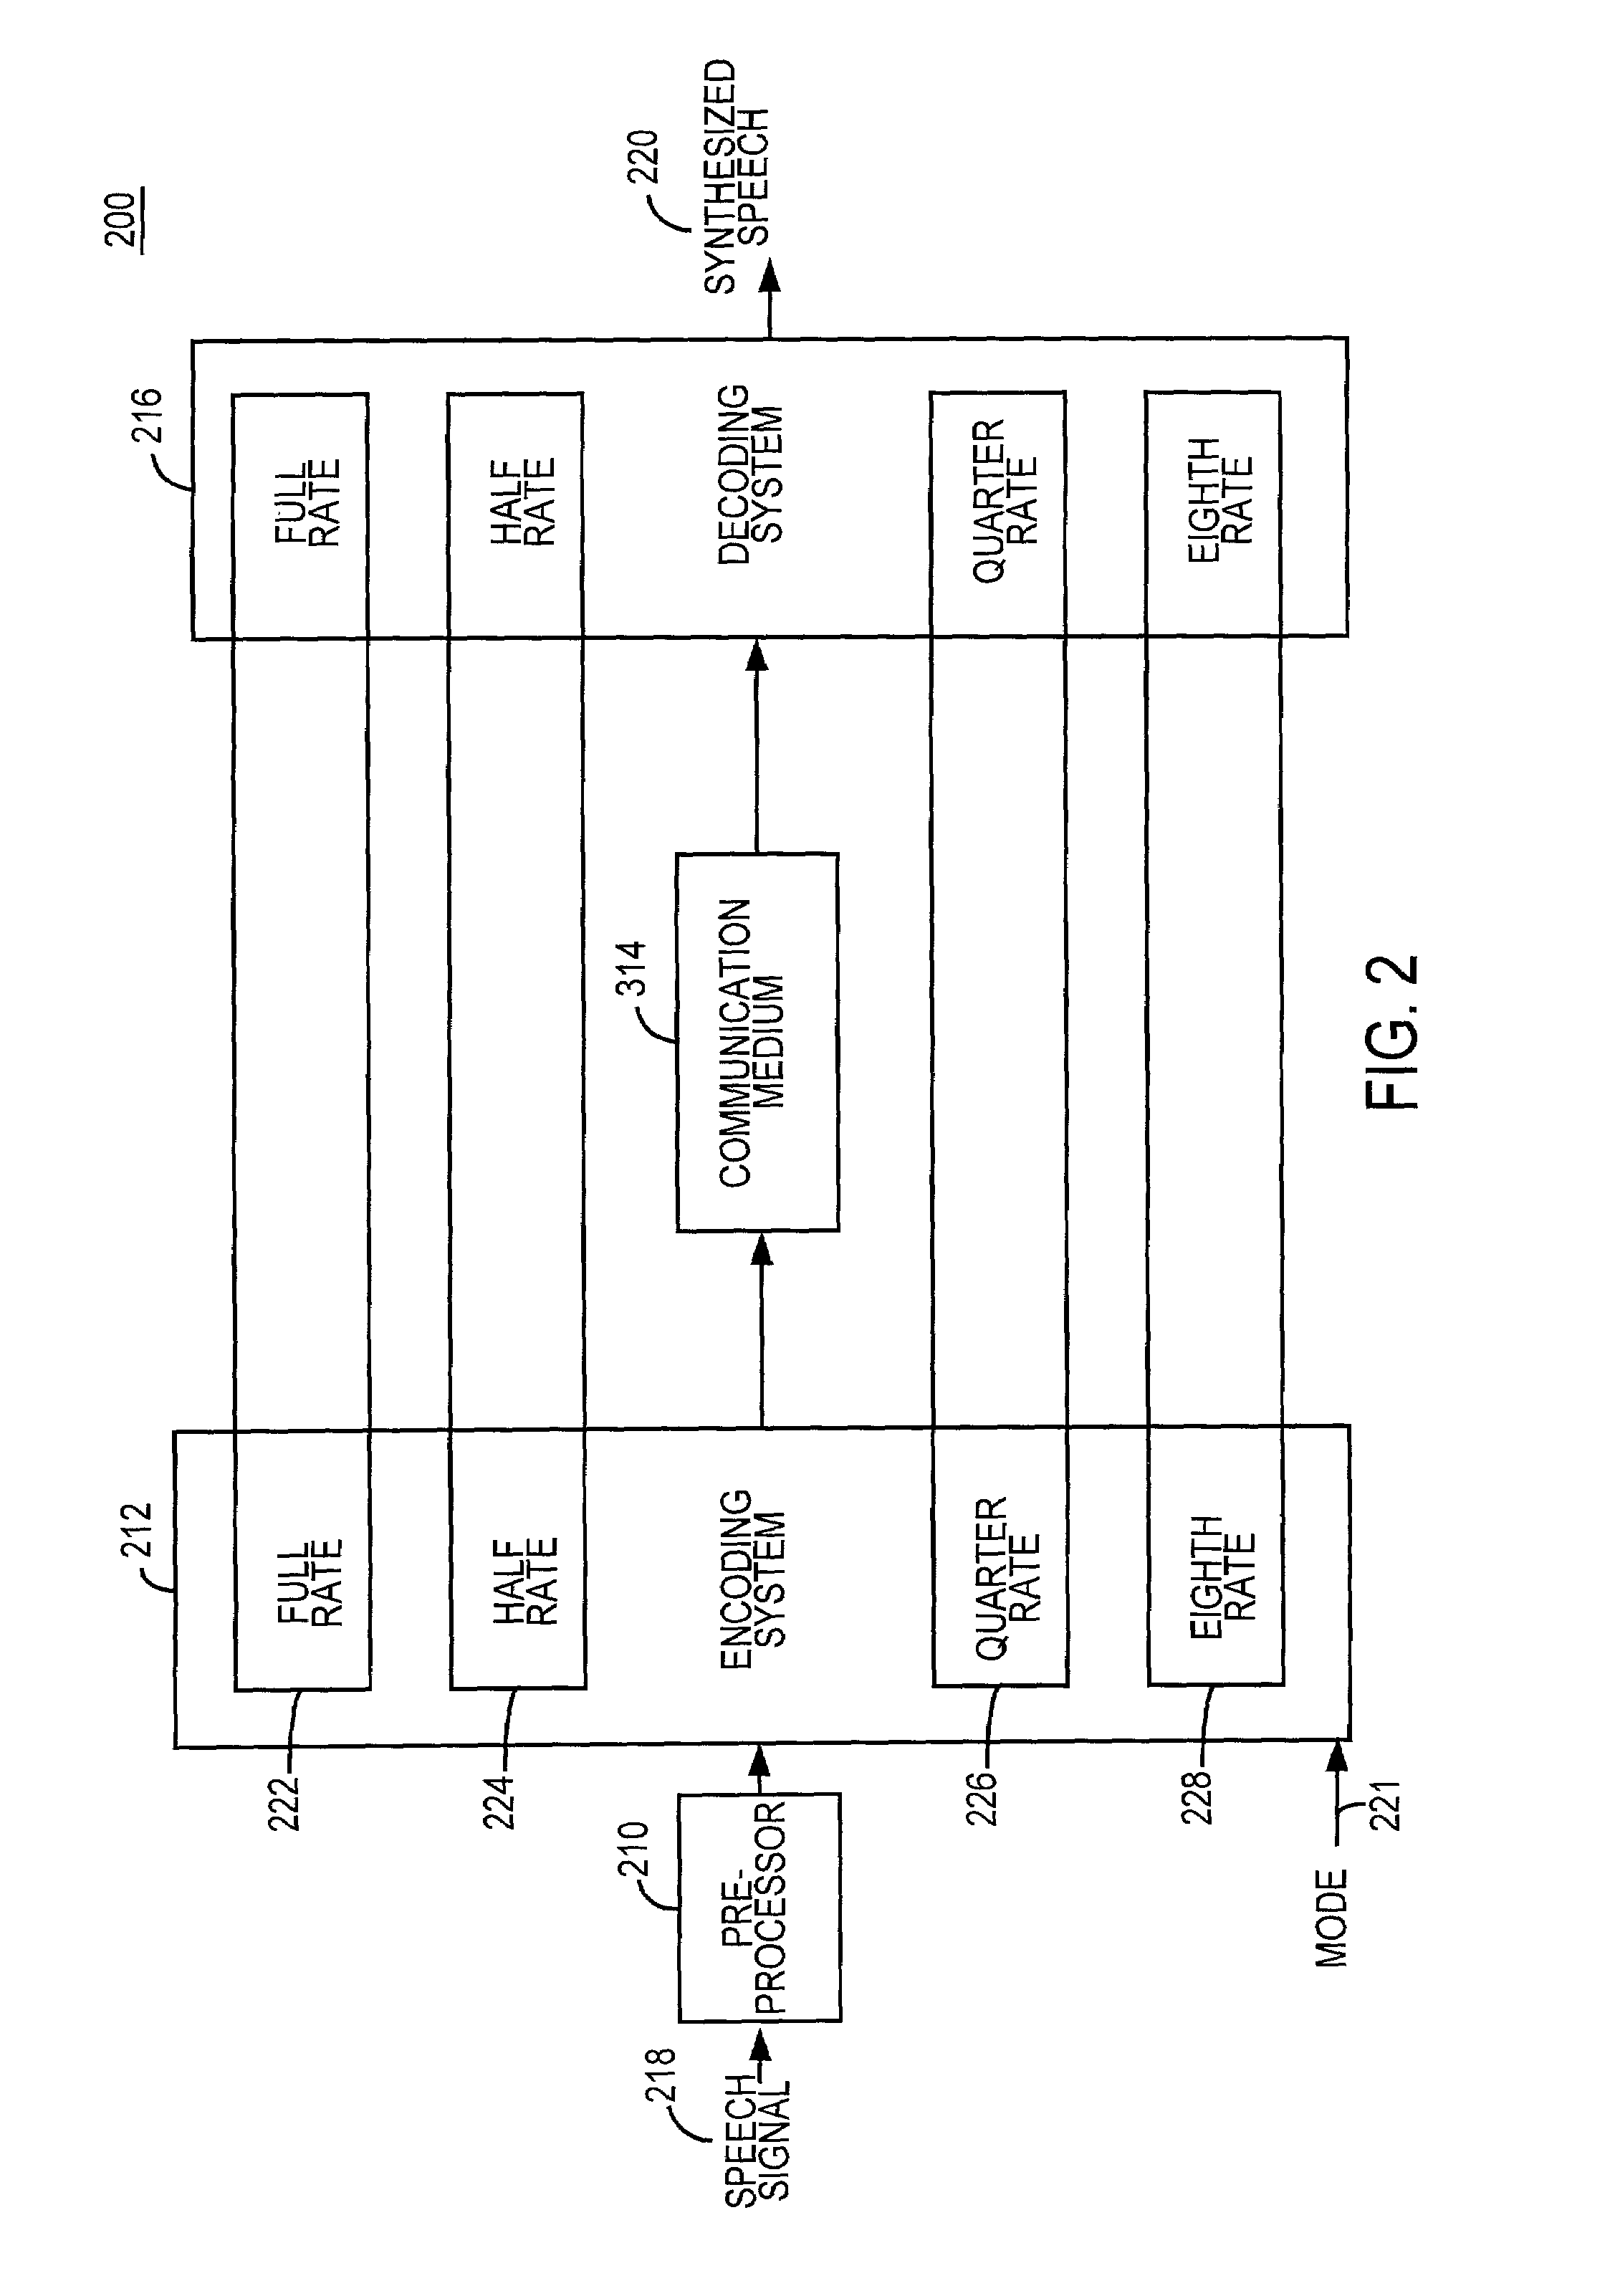 Speech coding system with time-domain noise attenuation